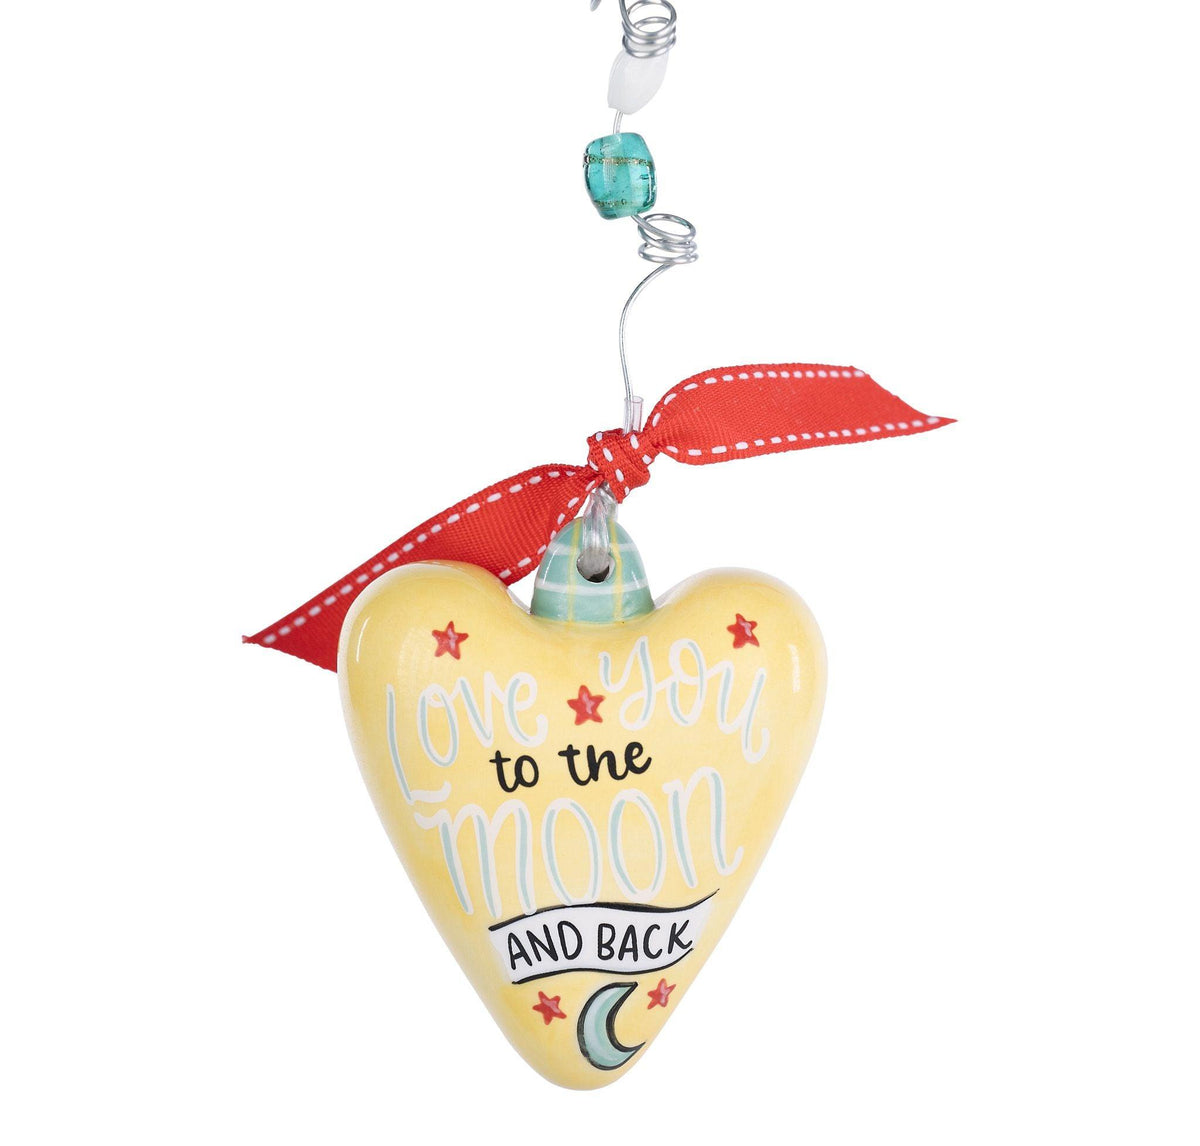 Love You to the Moon Heart Ornament - GLORY HAUS 